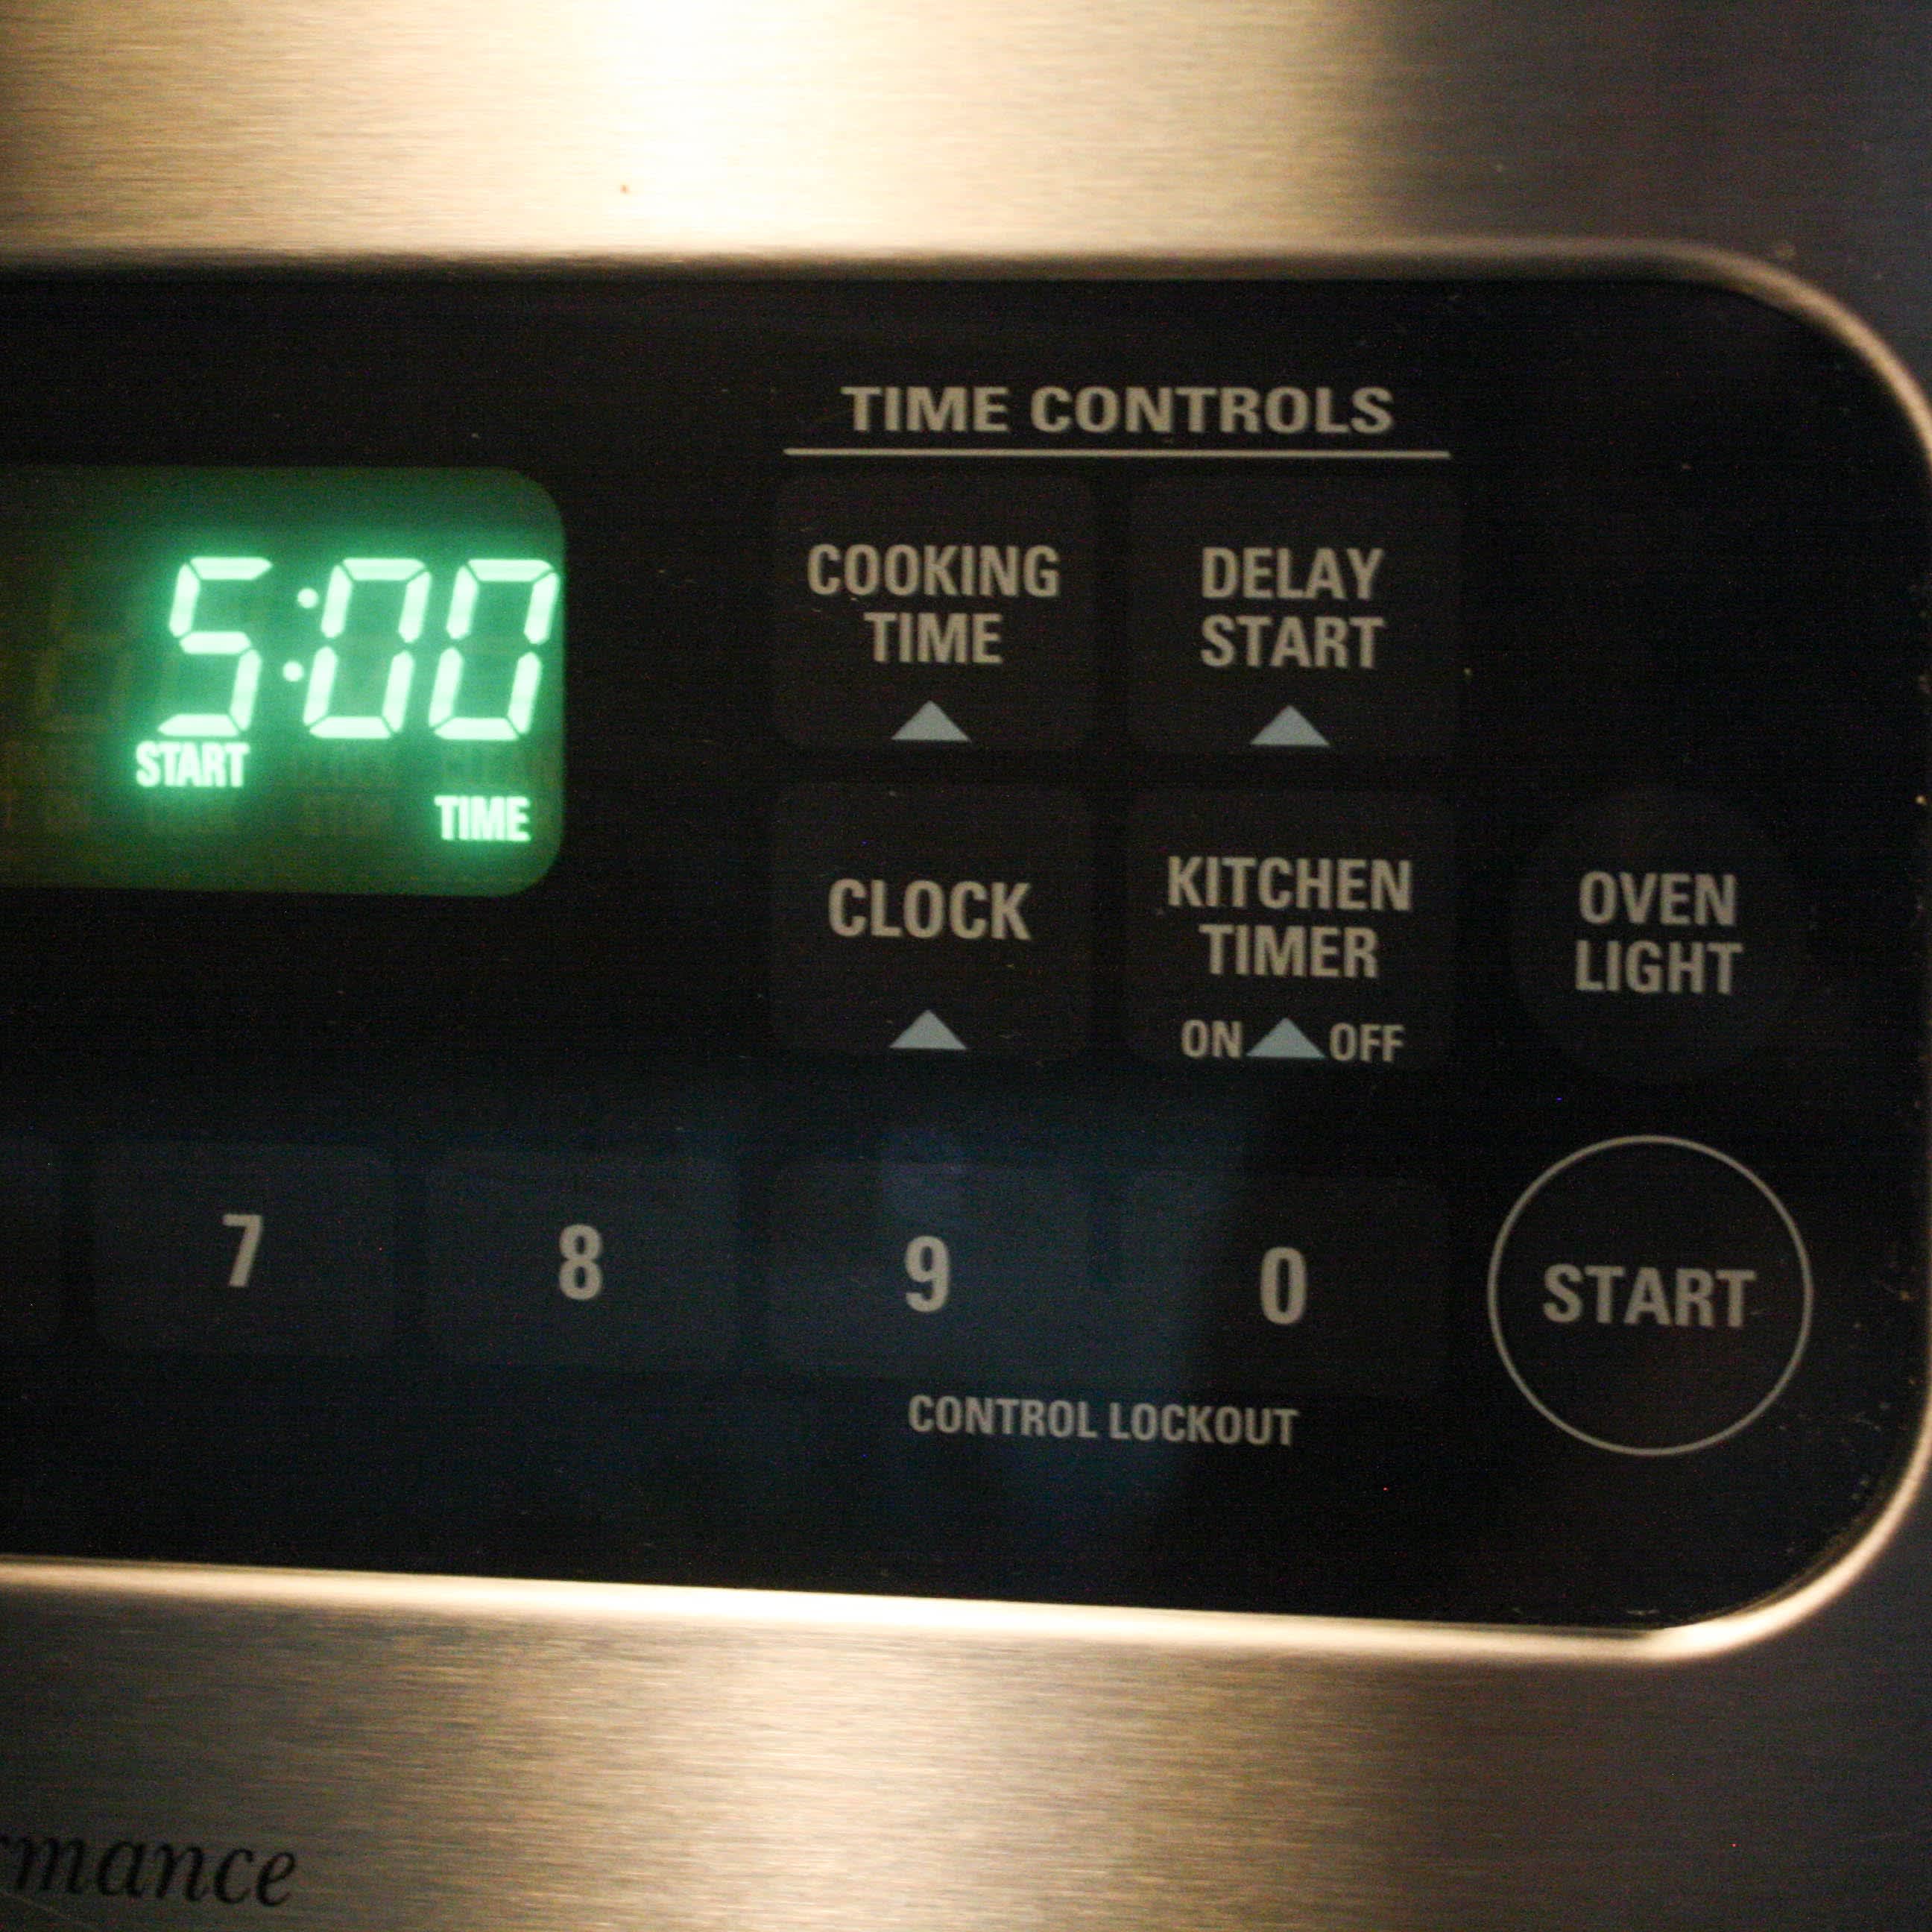 Using Your Oven Delay Timer - All My Good Things